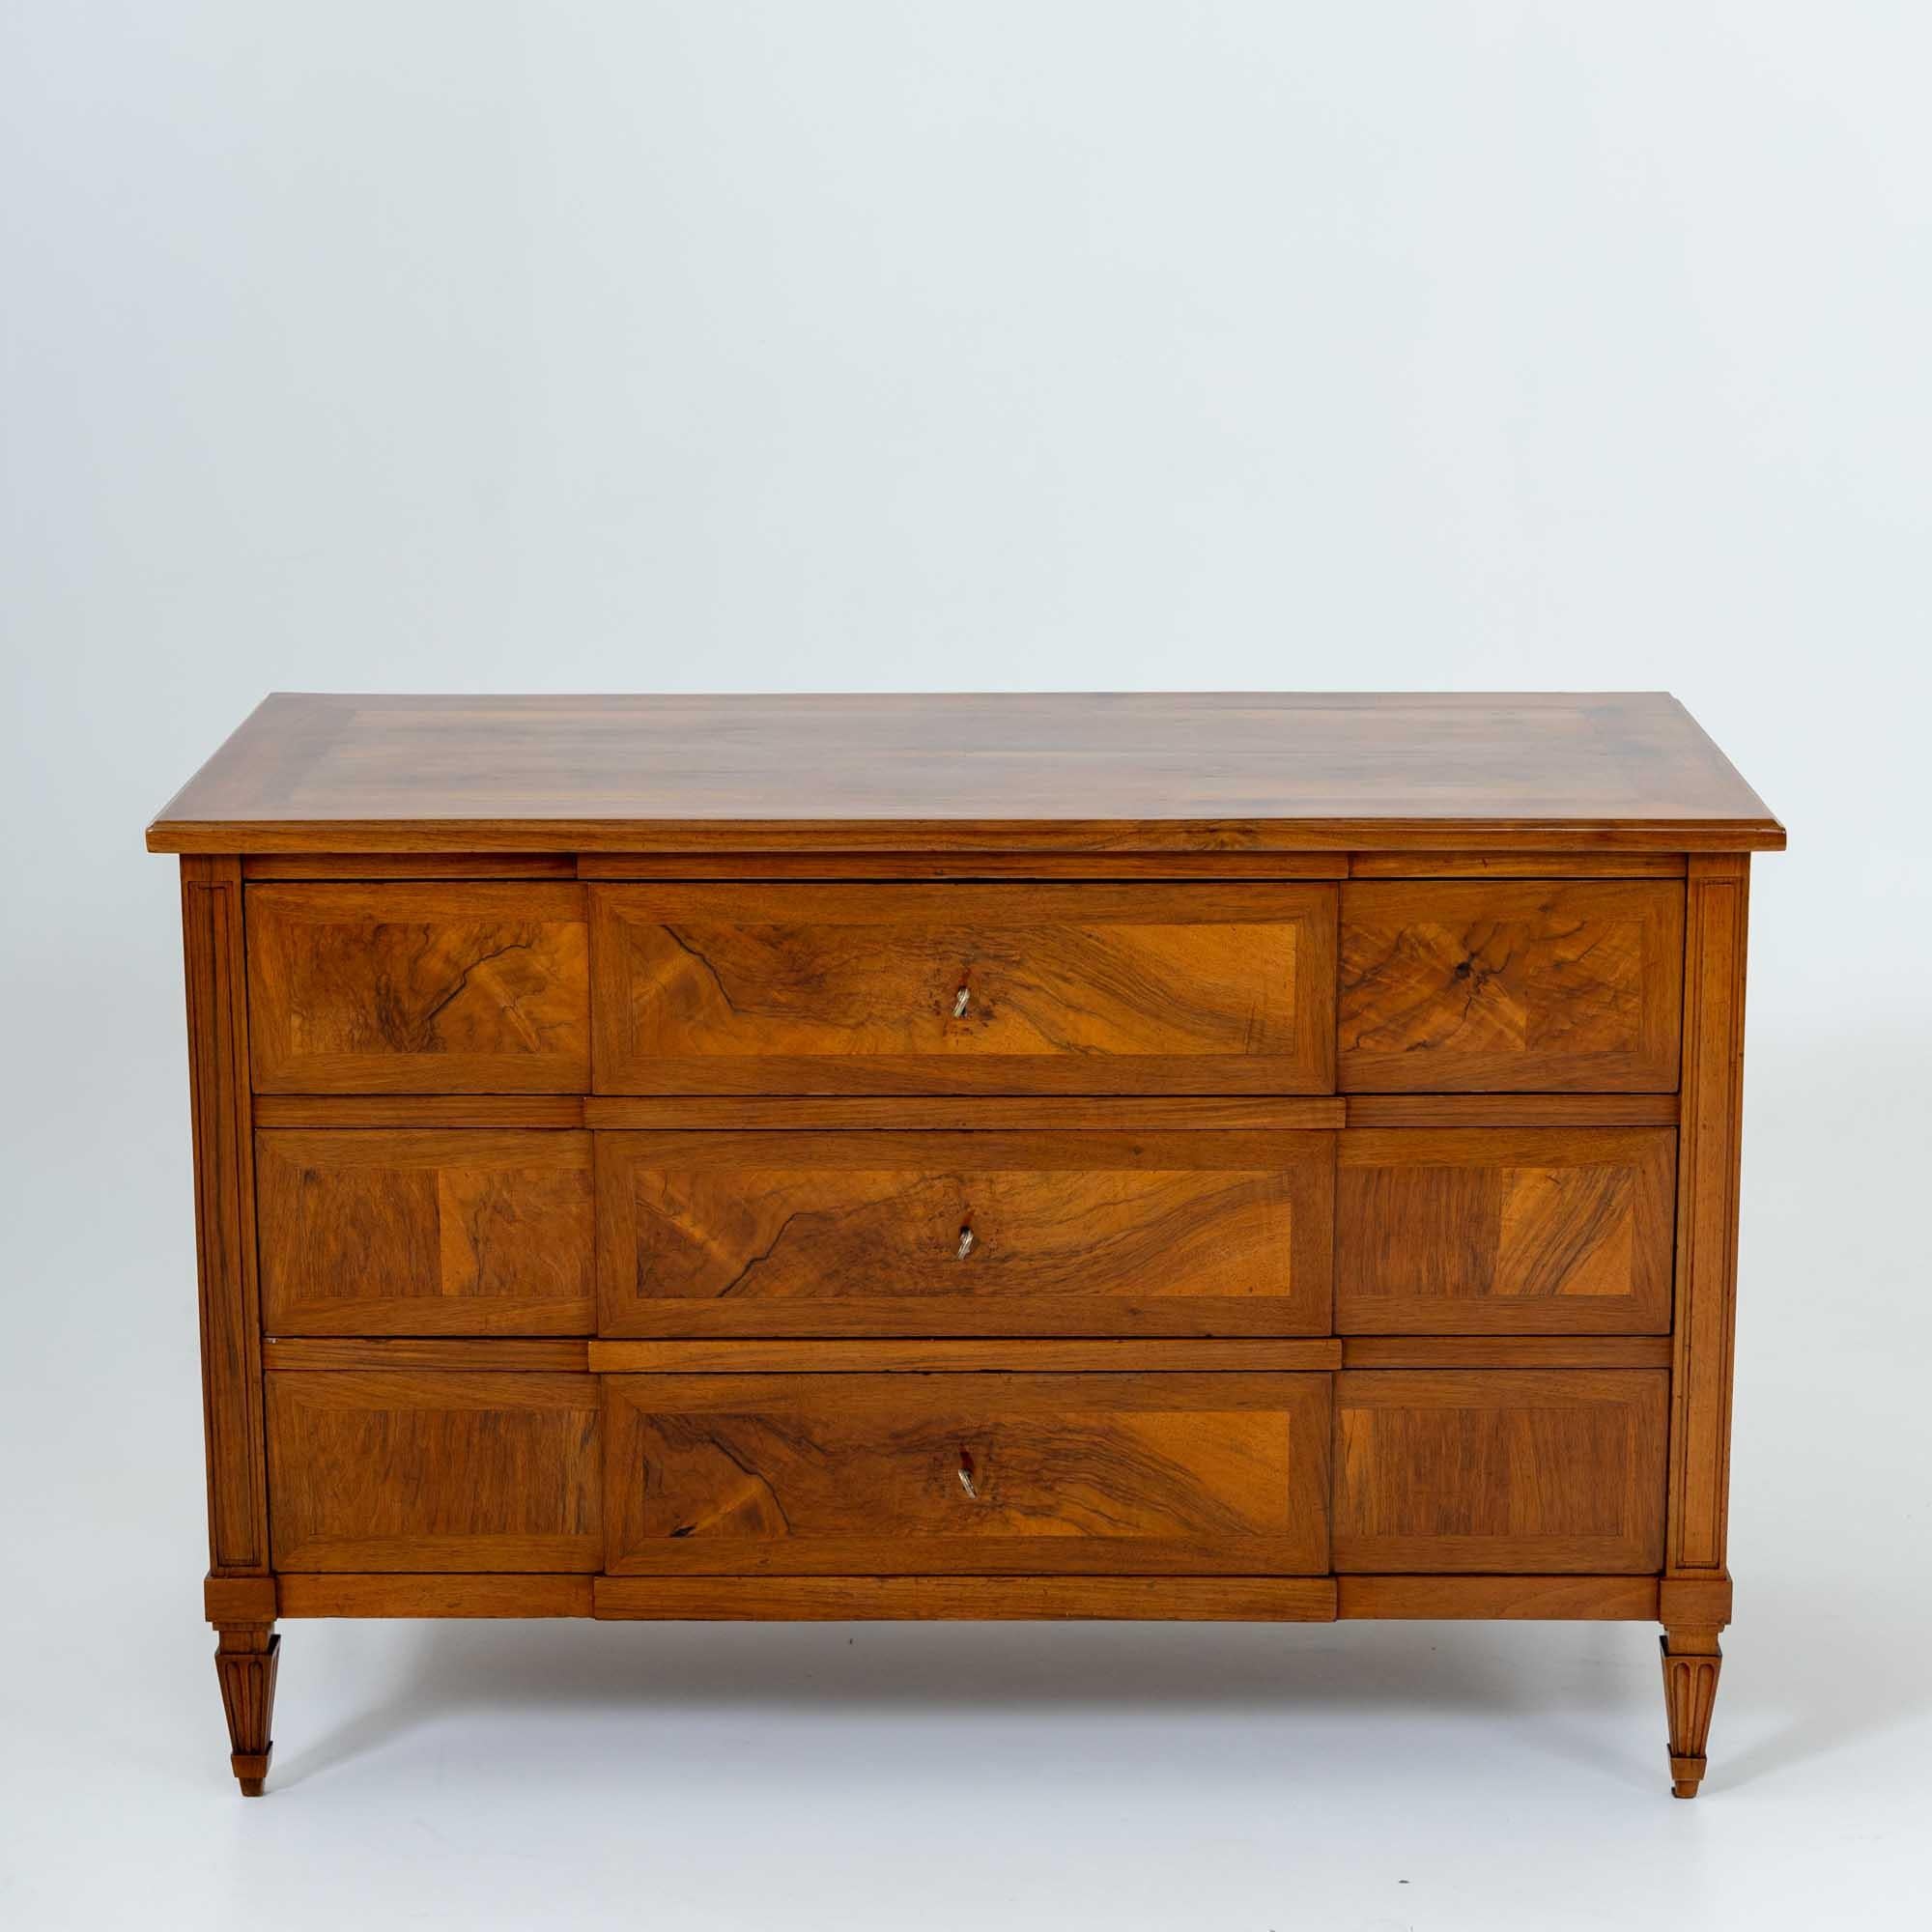 Large Louis XVI chest of drawers with three drawers standing on square tapered feet. The pilaster strips and legs of the chest of drawers feature carved frame decoration and fluting. The drawer fronts are accentuated by a slightly protruding central